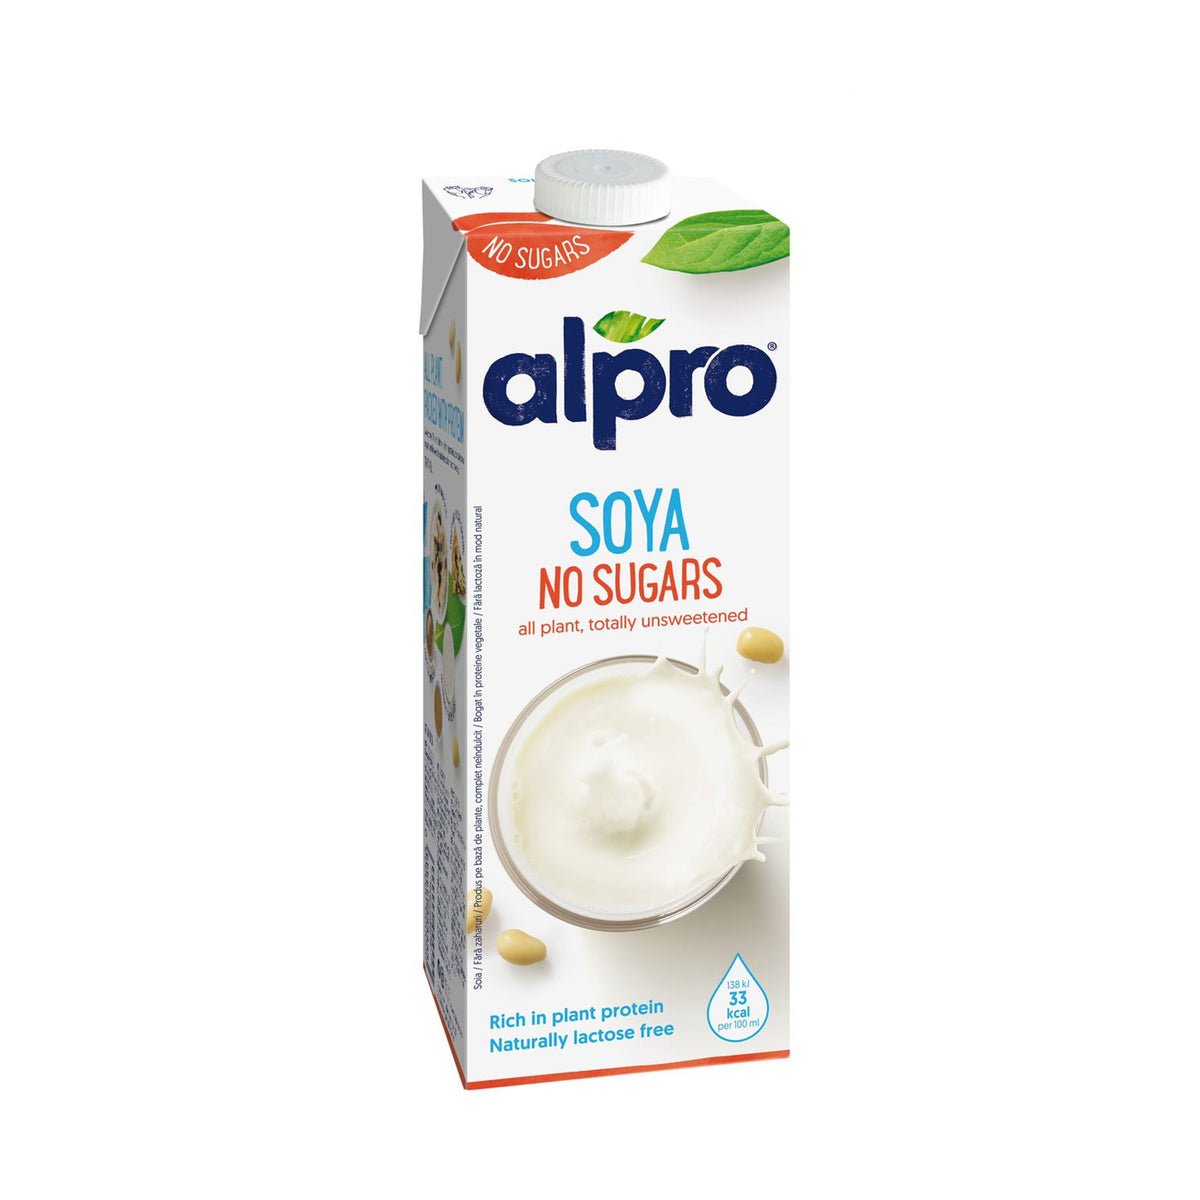 Alpro Soya Drink No Sugars All Plant Totally Unsweetened 1L